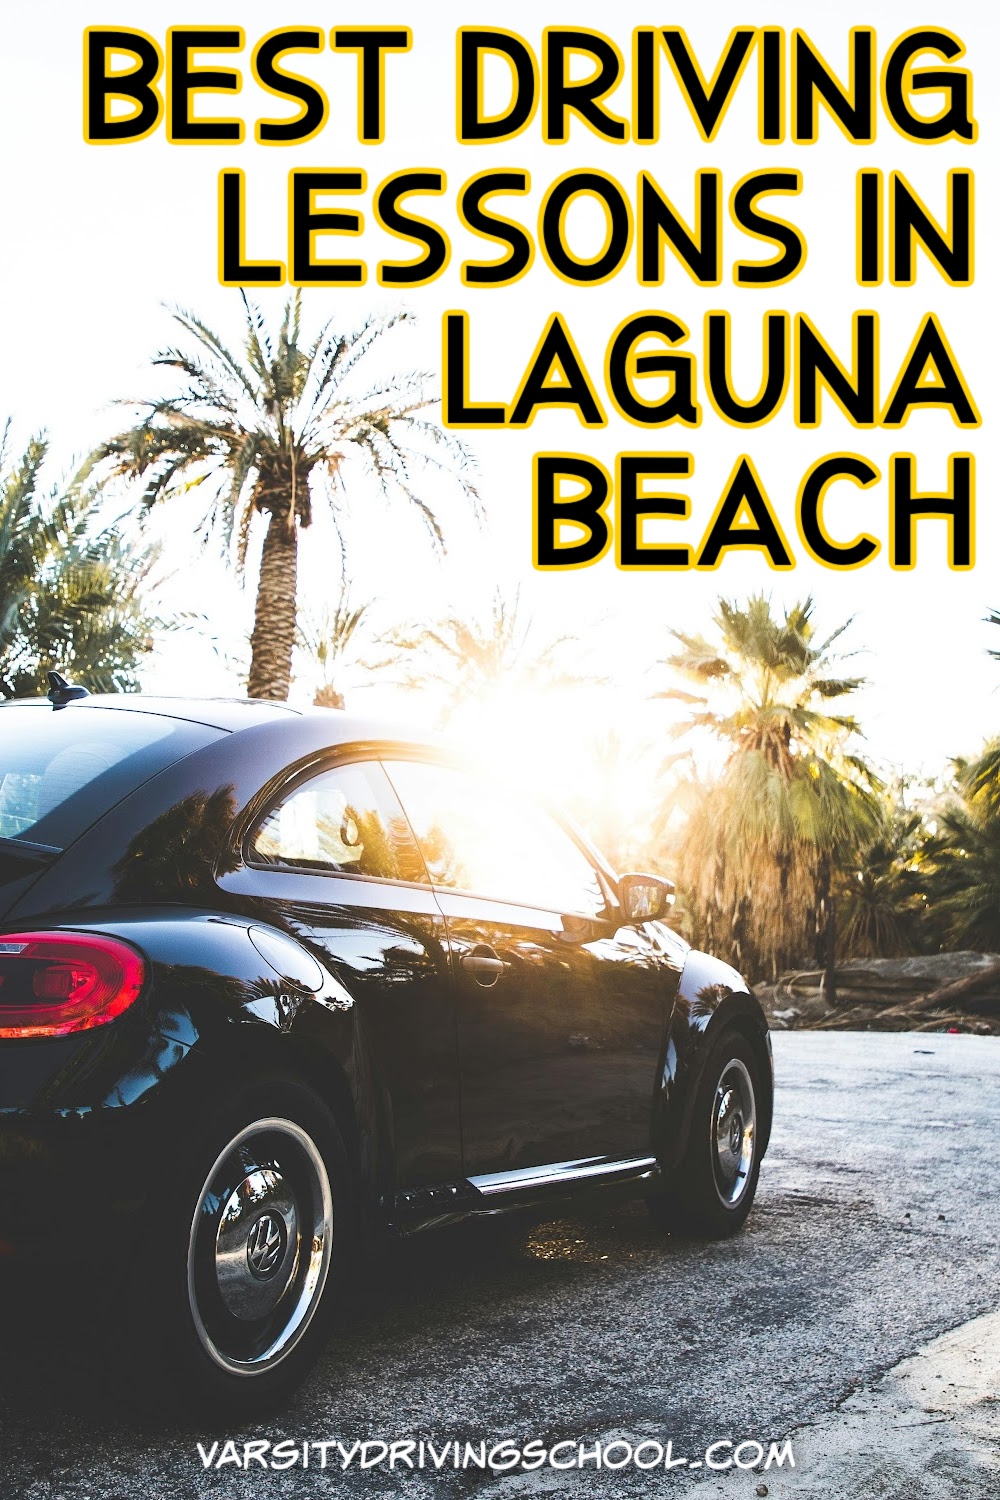 Varsity Driving School provides students with the best driving lessons in Laguna Beach which helps ensure they become safe drivers.